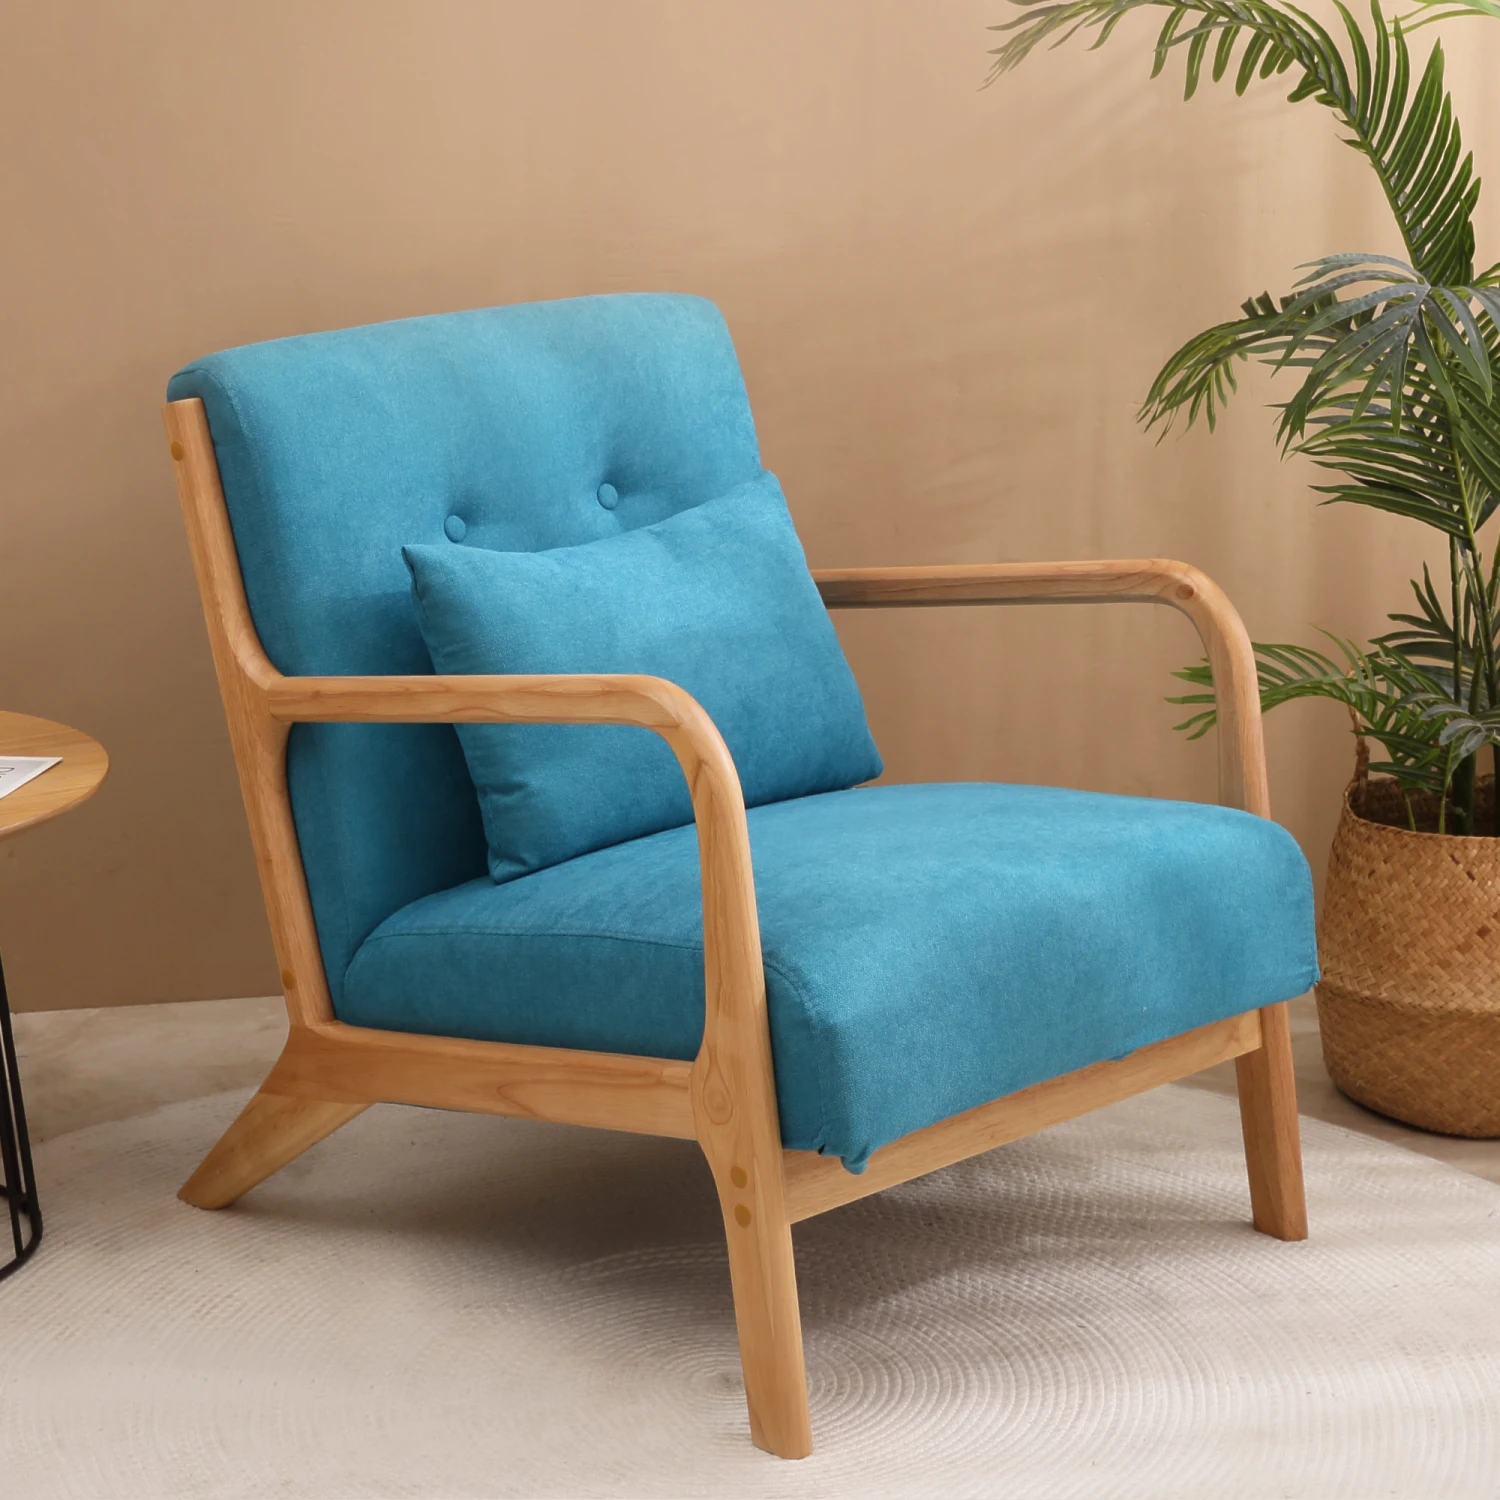 

Cozy Mid Century Modern Wood Frame Accent Chair - Upholstered Living Room Armchair with Ergonomic Design, Perfect Reading Chair